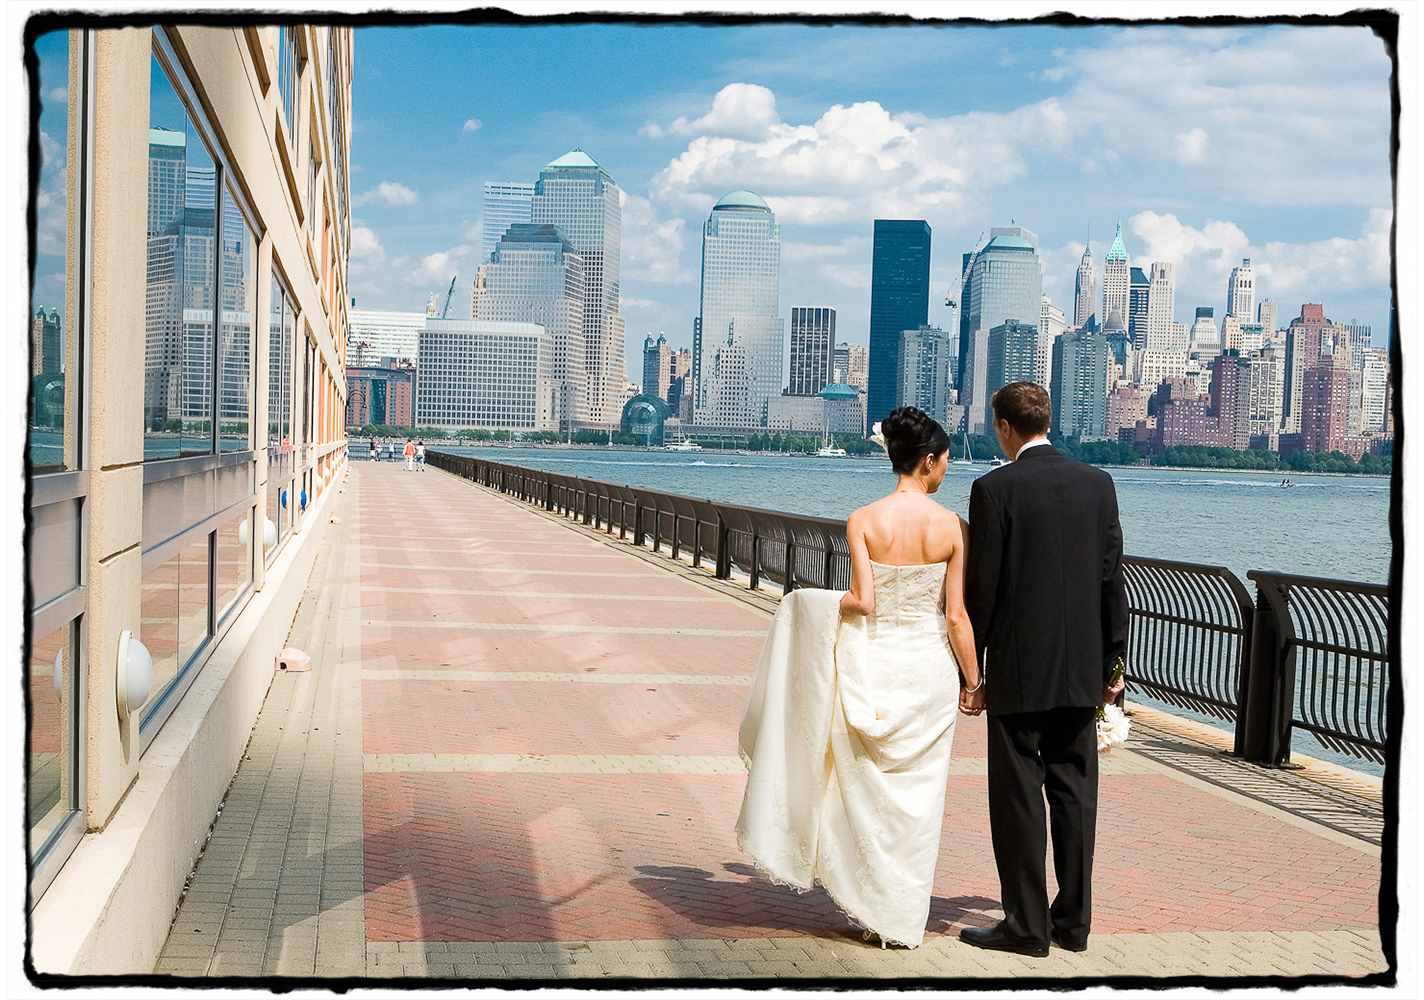 The promenade by the Hyatt in Jersey City offers stunning views of the skyline.